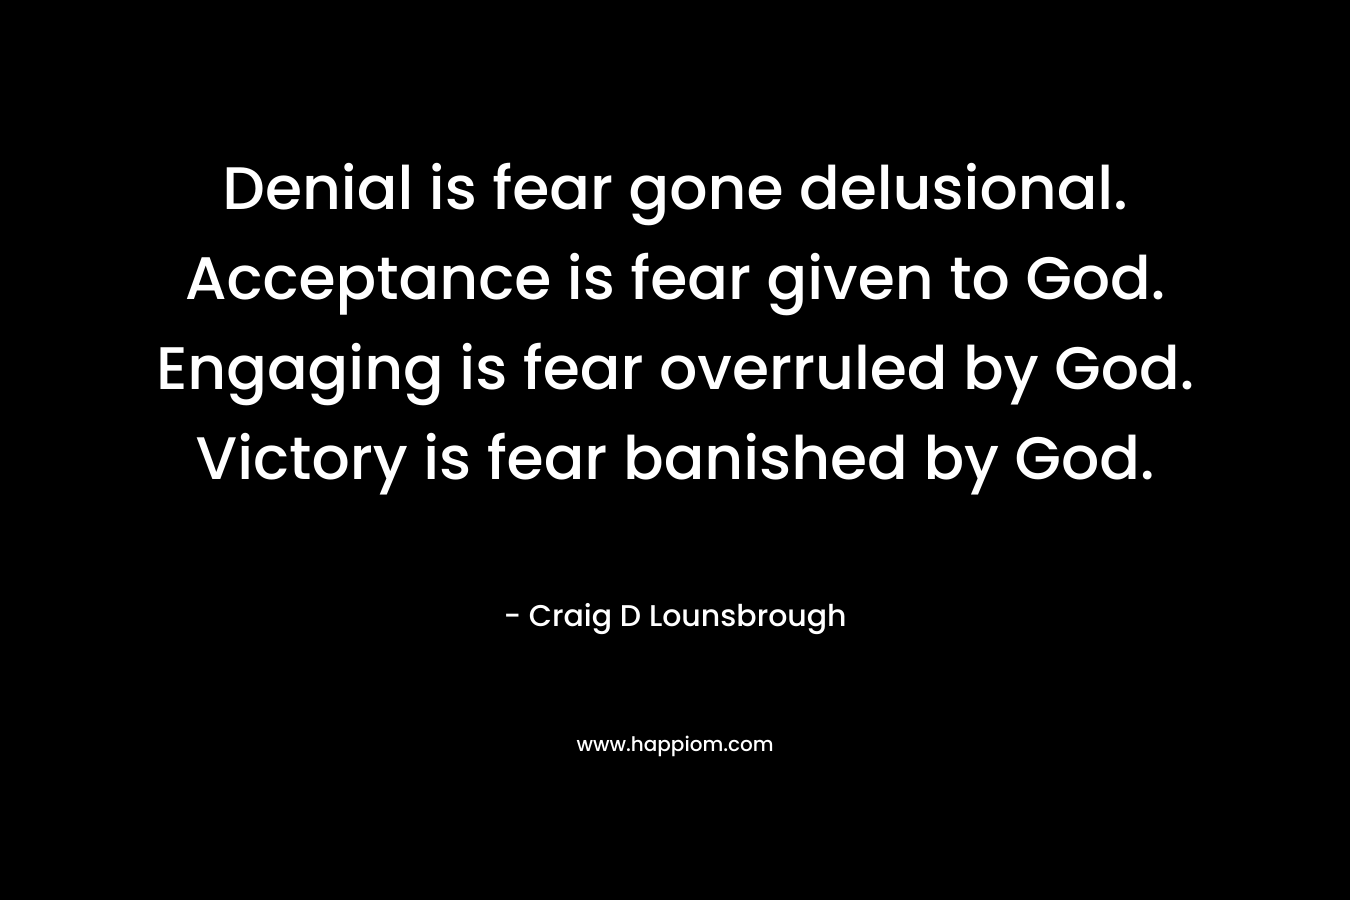 Denial is fear gone delusional. Acceptance is fear given to God. Engaging is fear overruled by God. Victory is fear banished by God.